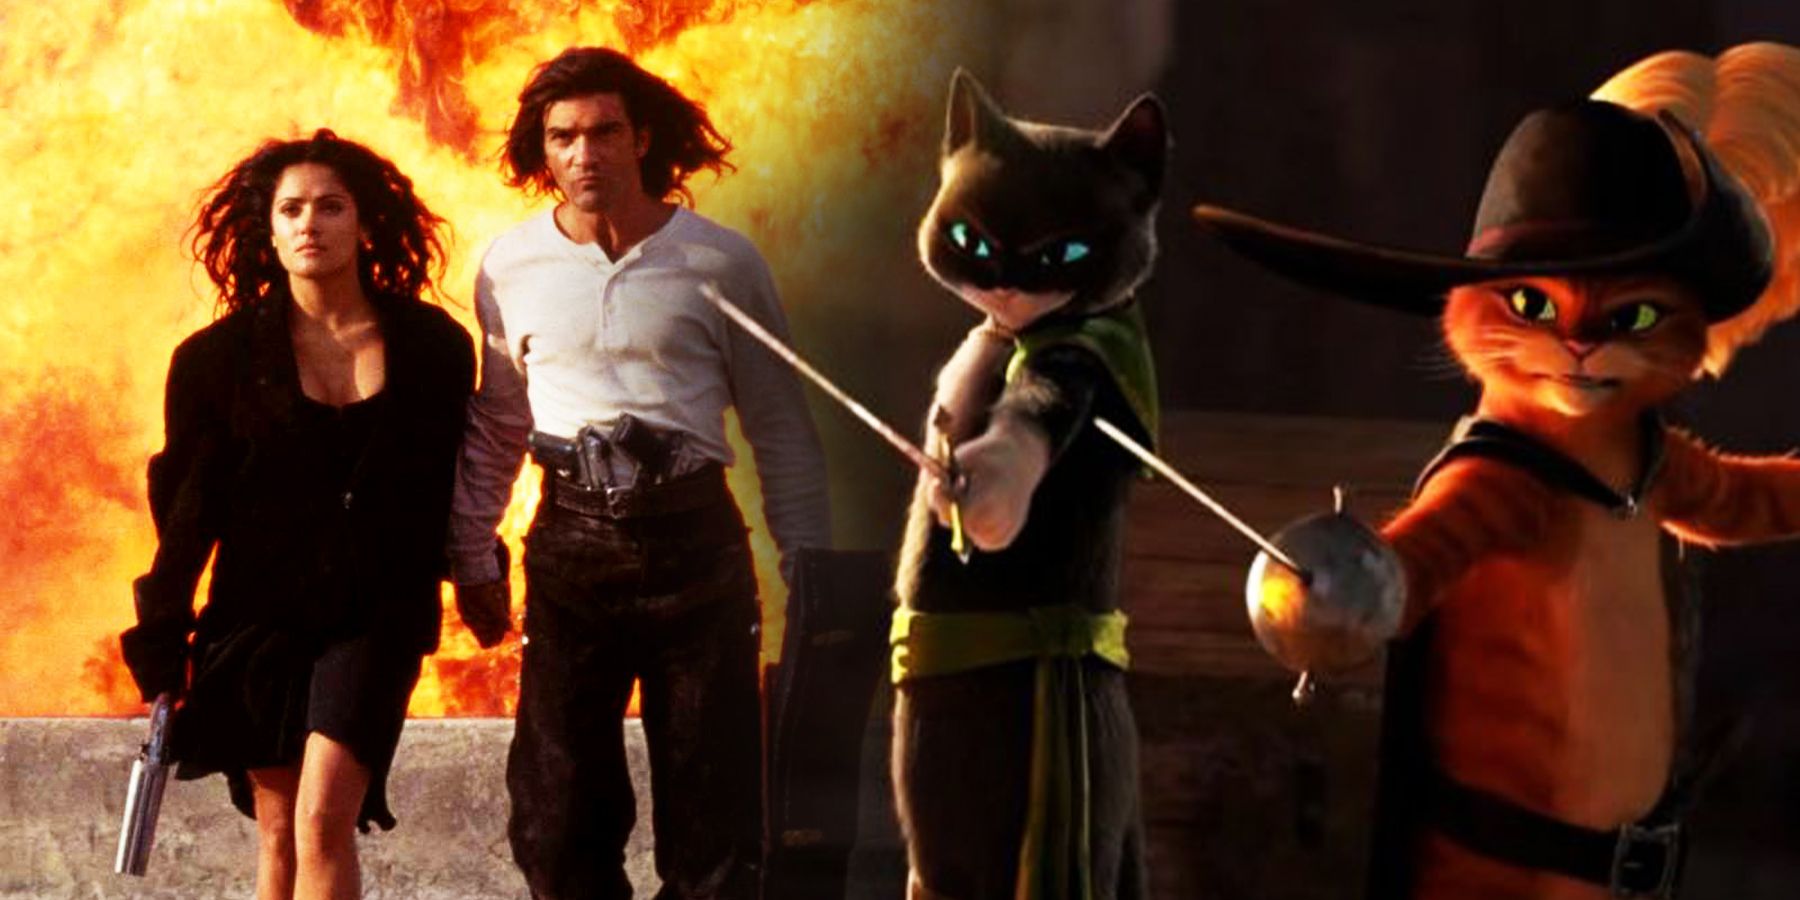 On the left, Carolina and El Mariachi of 'Desperado' walk away from an explosion. On the right, Kitty Softpaws and Puss in Boots point their swords. 